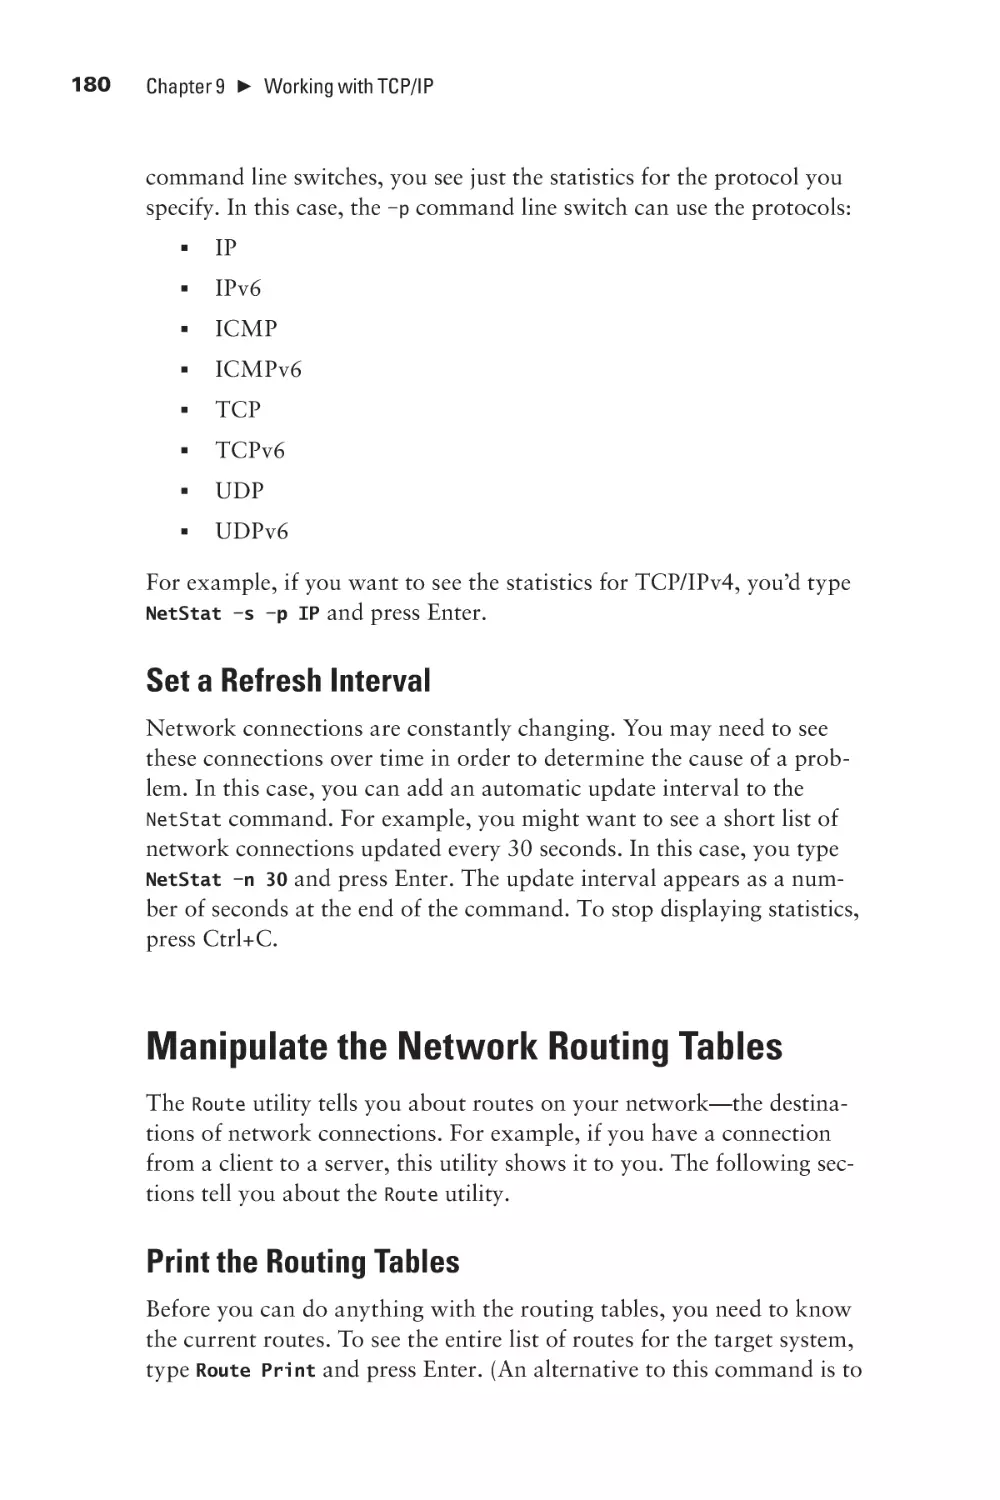 Manipulate the Network Routing Tables